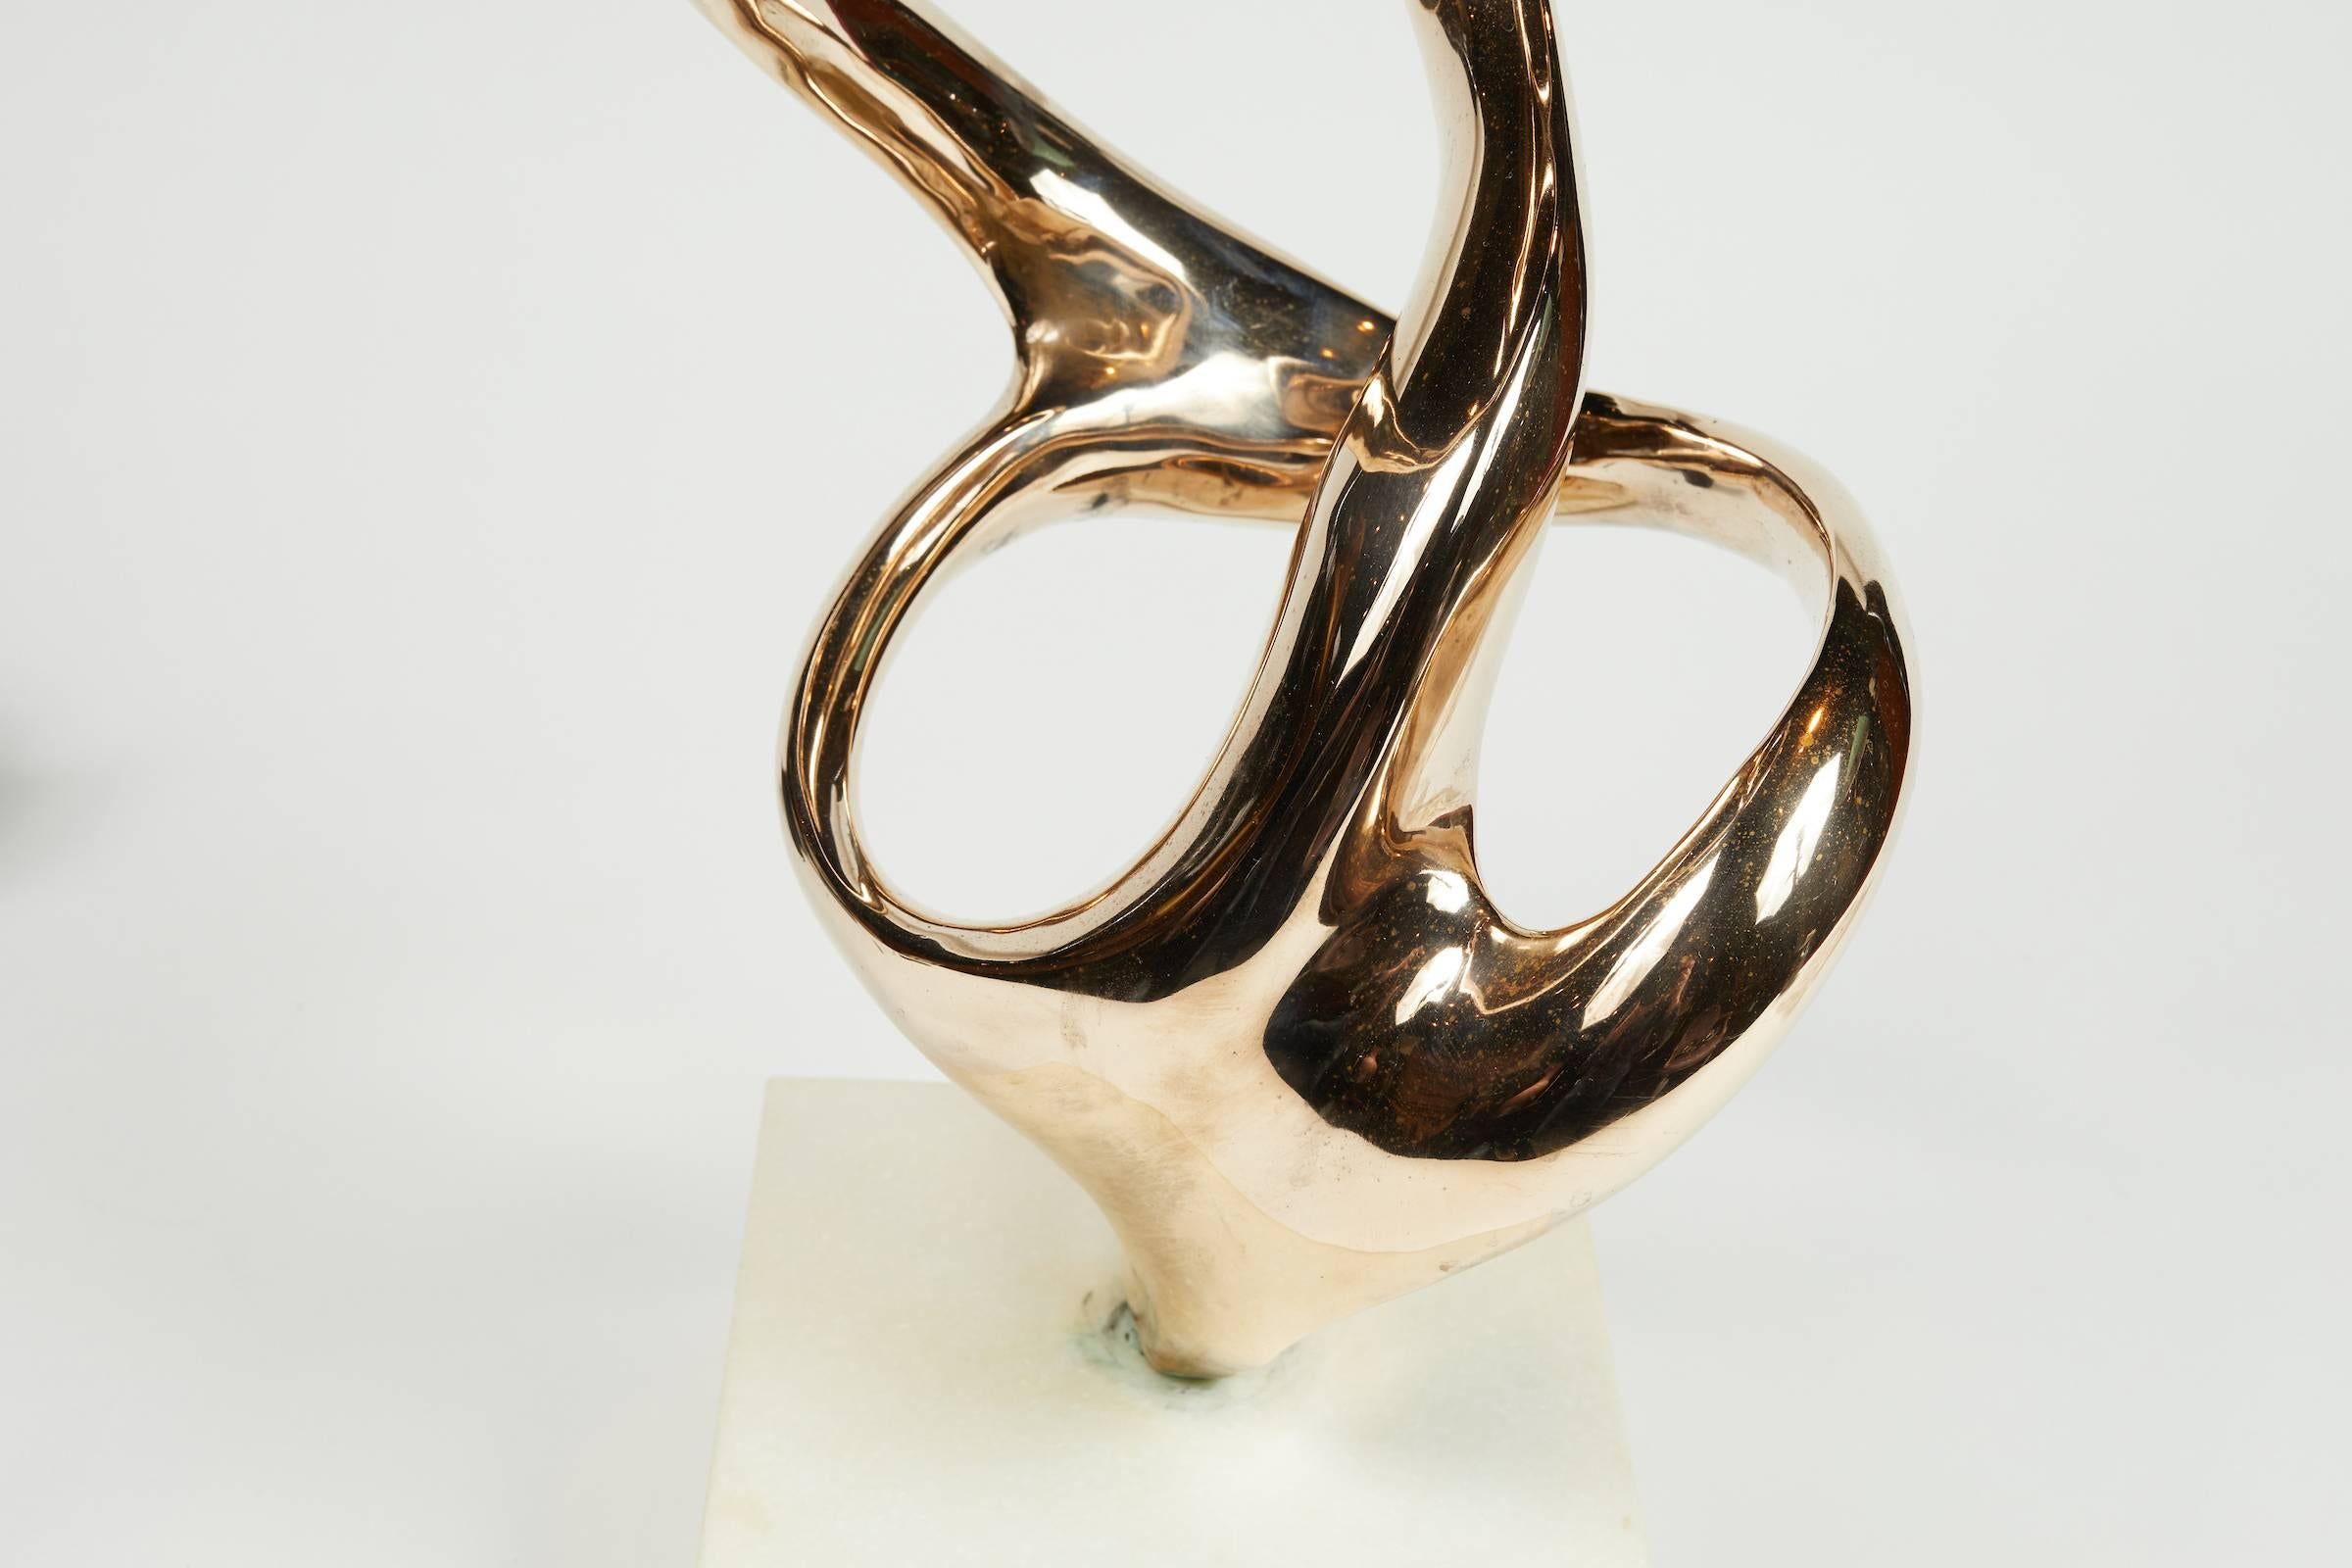 Abstract Polished Bronze Sculpture by Kieff 2